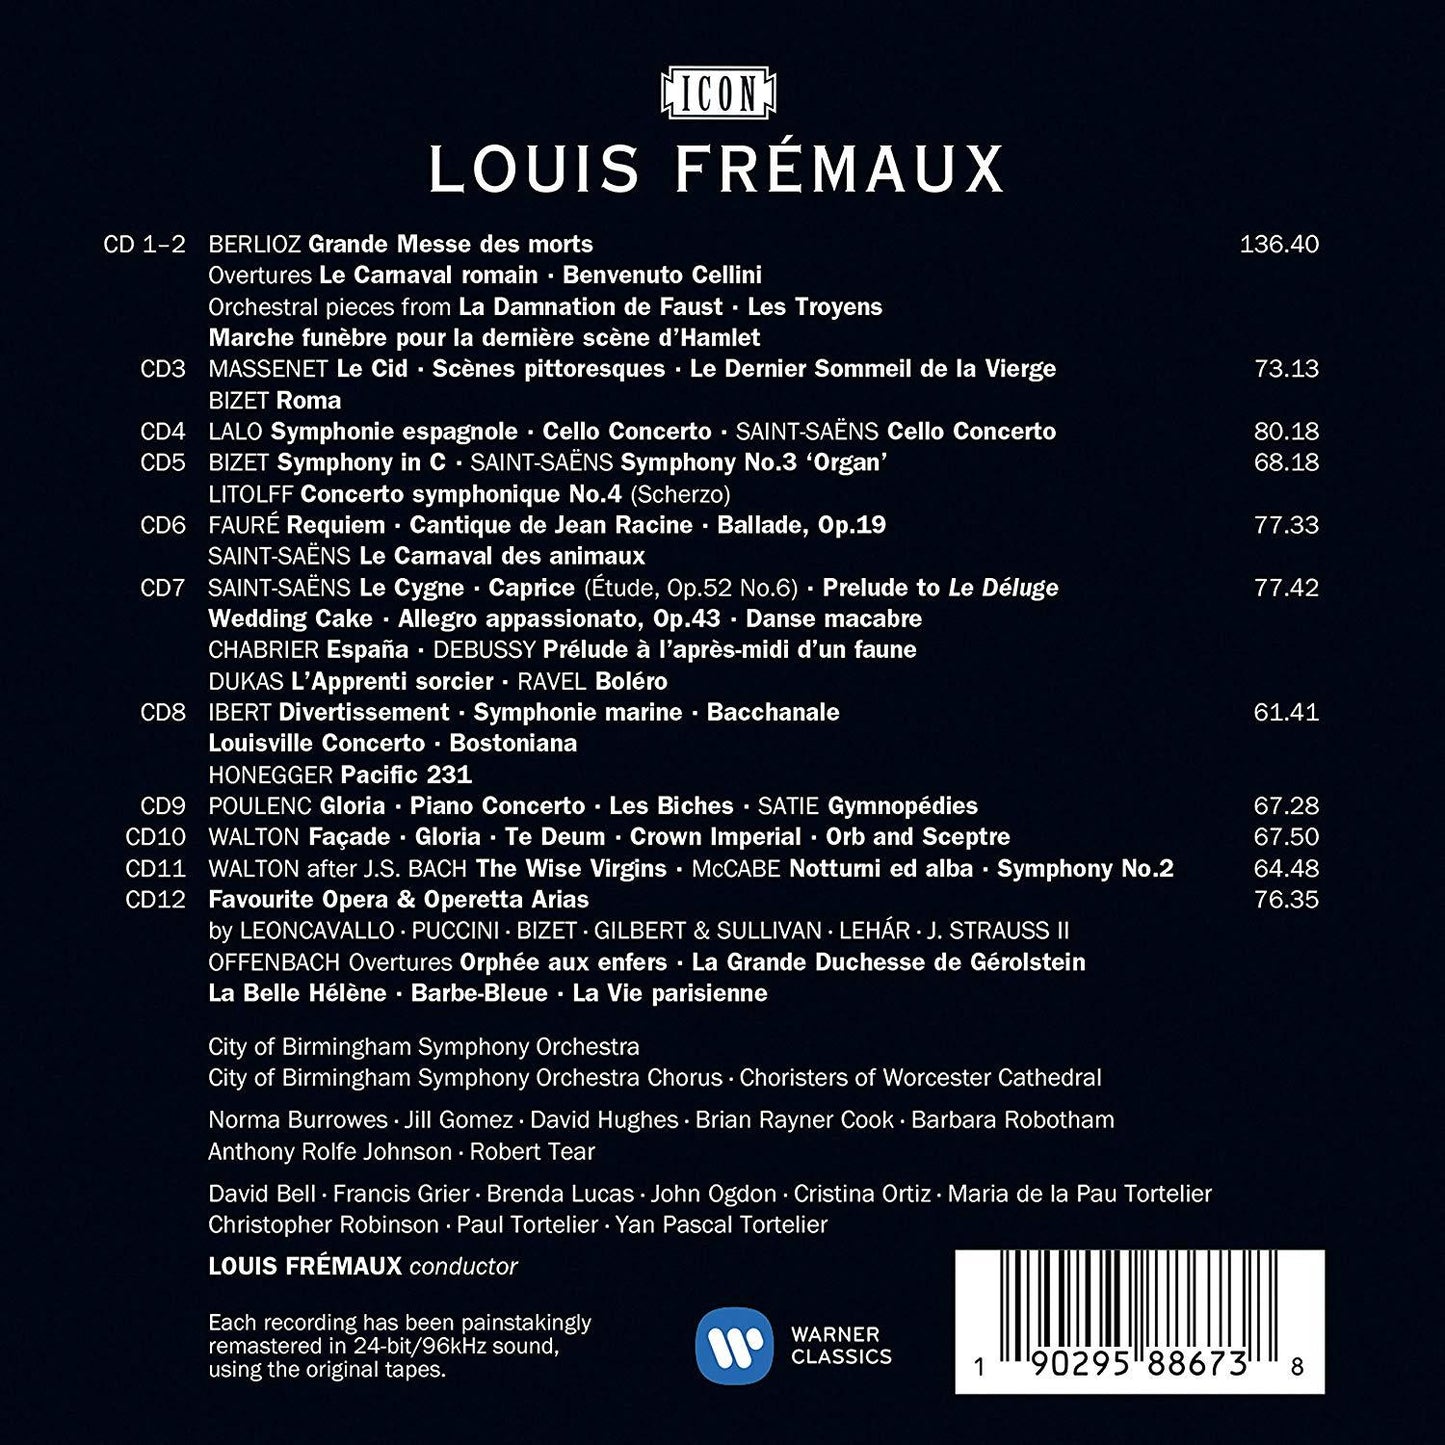 LOUIS FREMAUX -  ICON: THE BIRMINGHAM YEARS (12 CD)